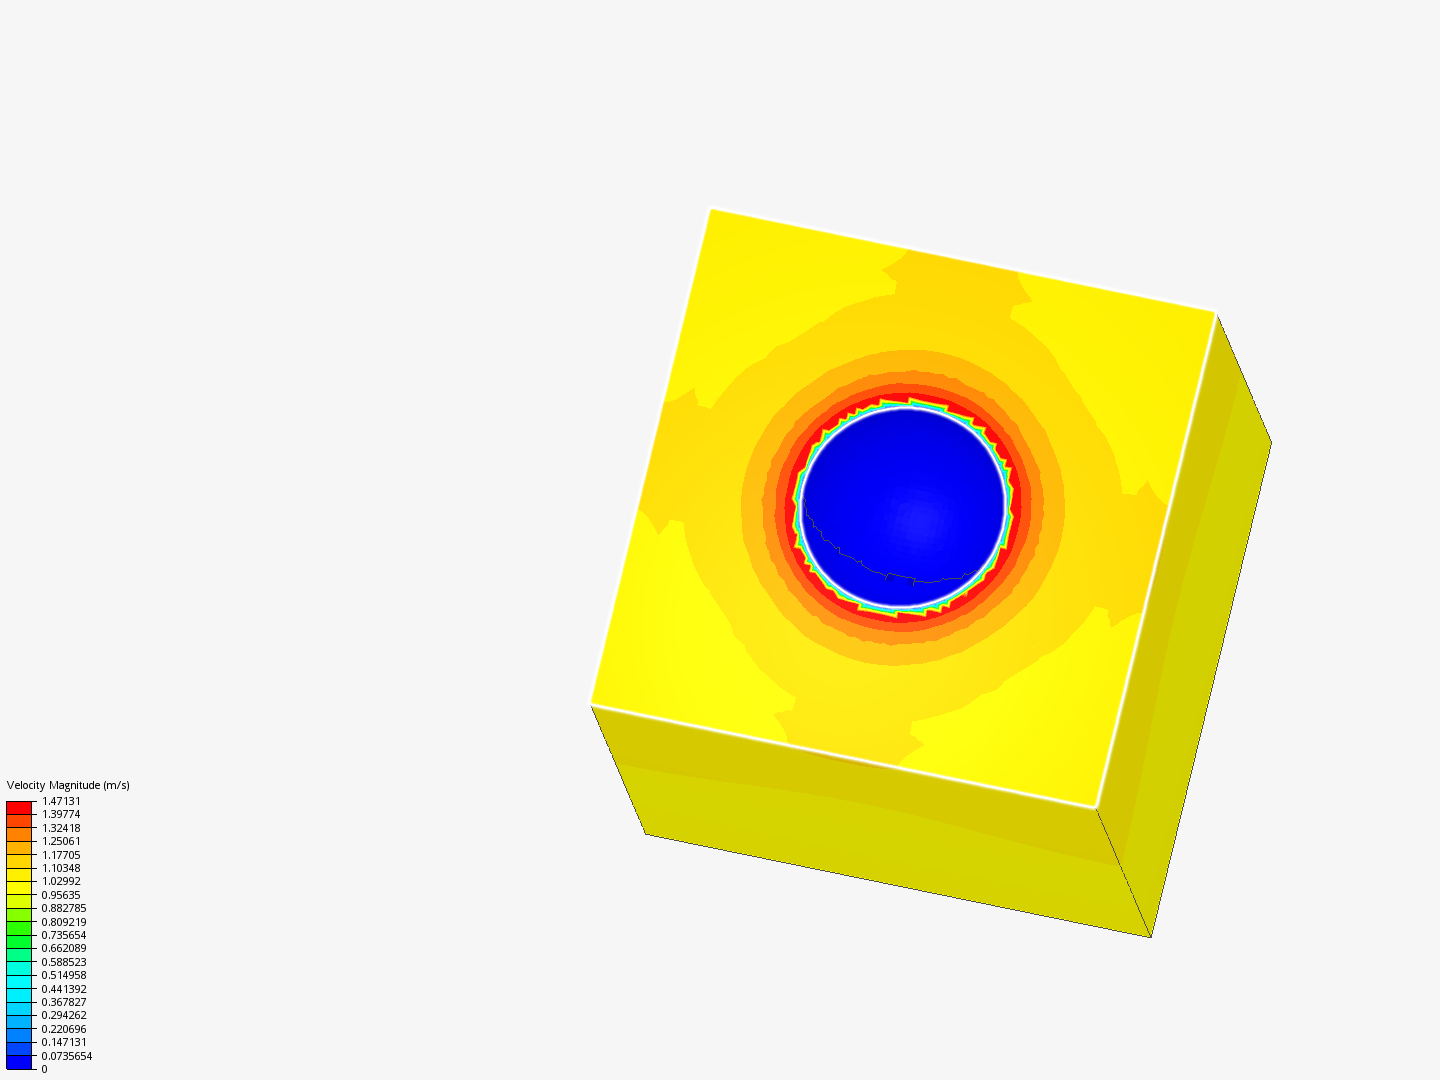 Sphere_CFD image